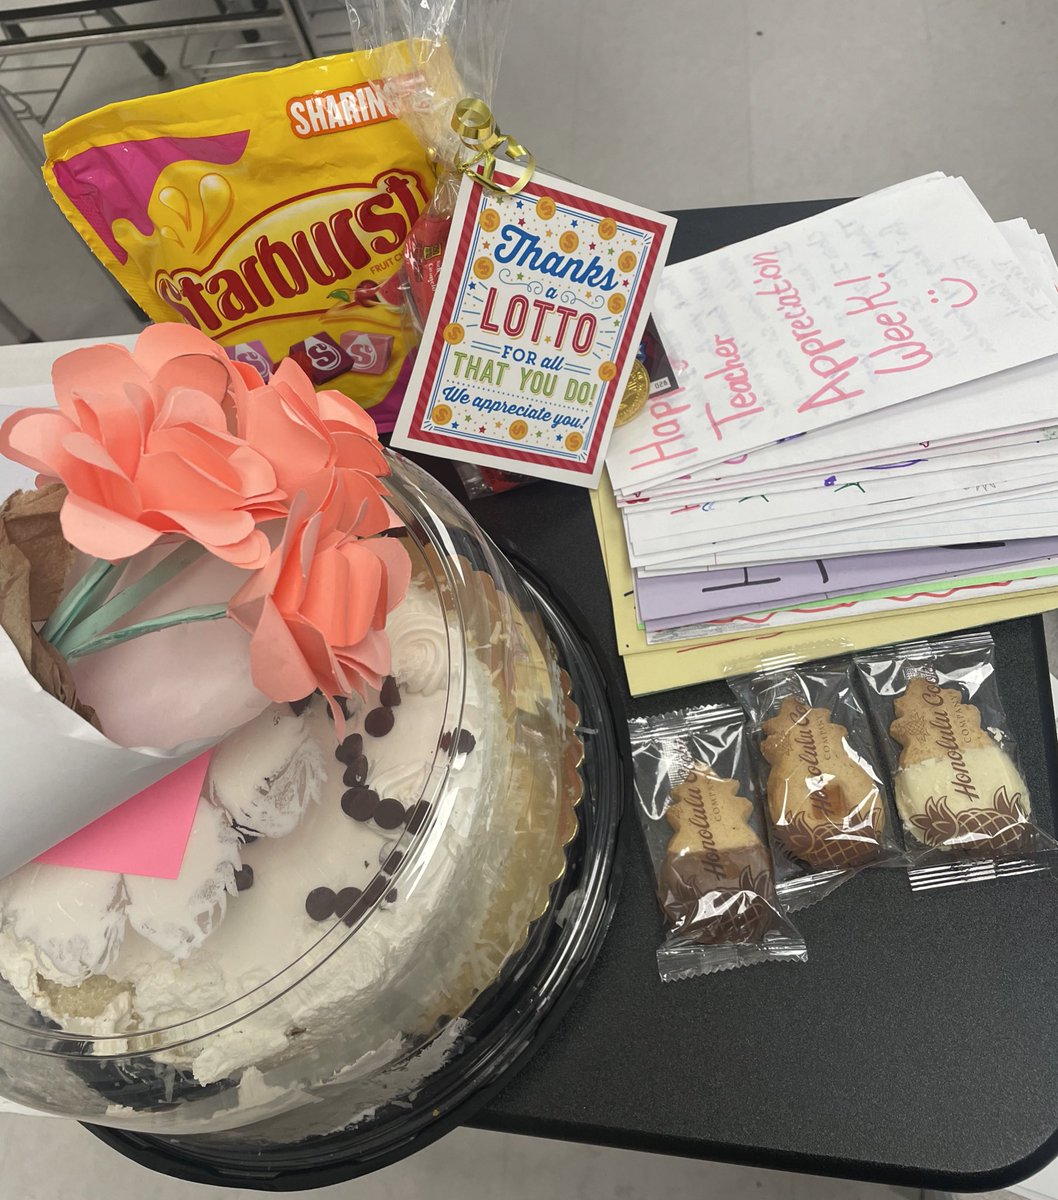 Blessed with so many wonderful students and an amazing leadership team @Eastlake_Middle. Loved our spa day compliments of @Eastlake_HS Cosmetology! This really was a special teacher appreciation week with my new community. 💕 #GreatnessOnTheHorizon #FearTheFalcon